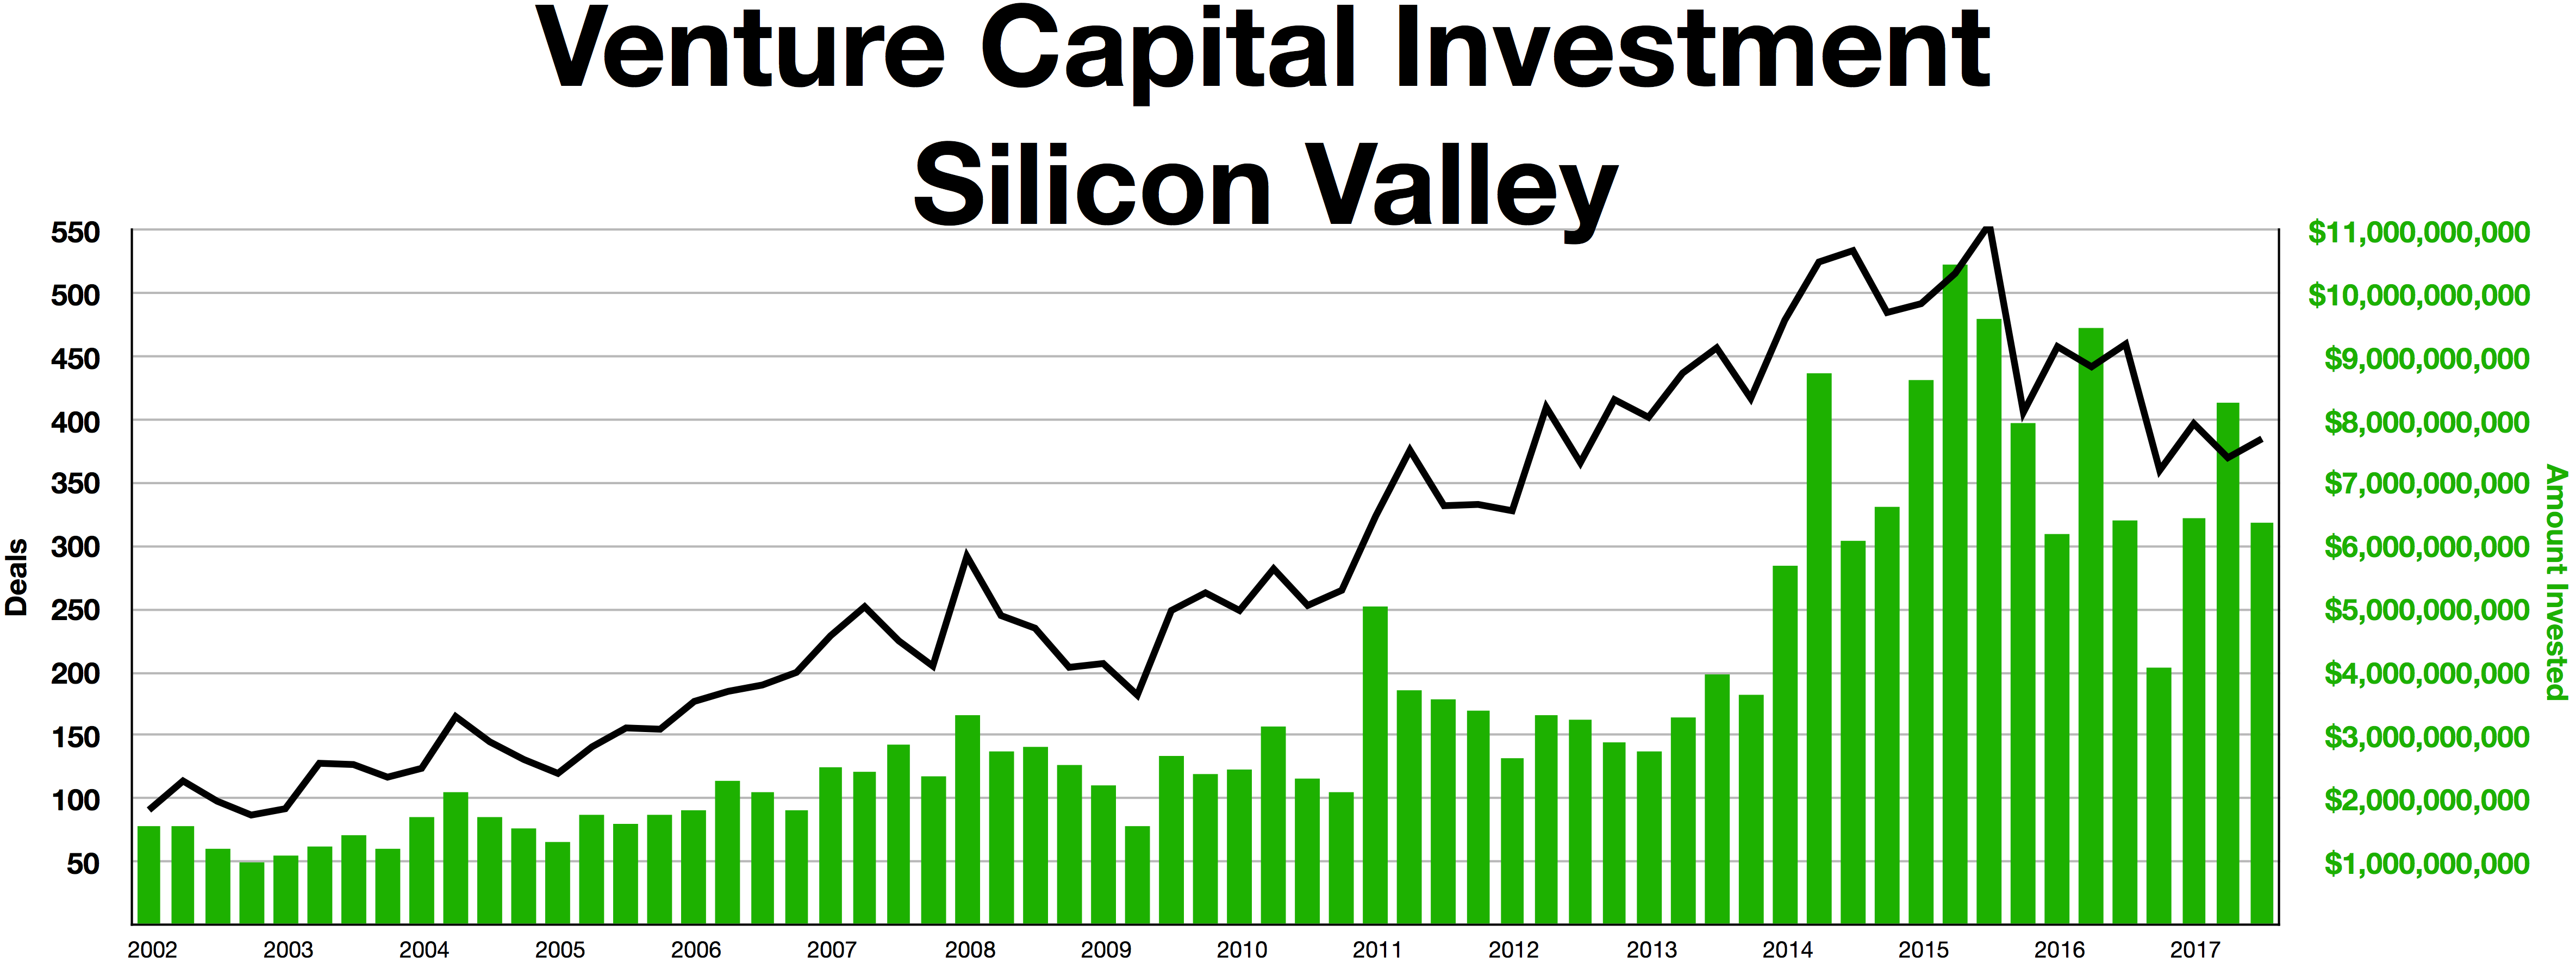 Silicon Vally Venture Capital investment.png English: Silicon Vally Venture Capital investment Date 30 October 2017 Source Own work https://www